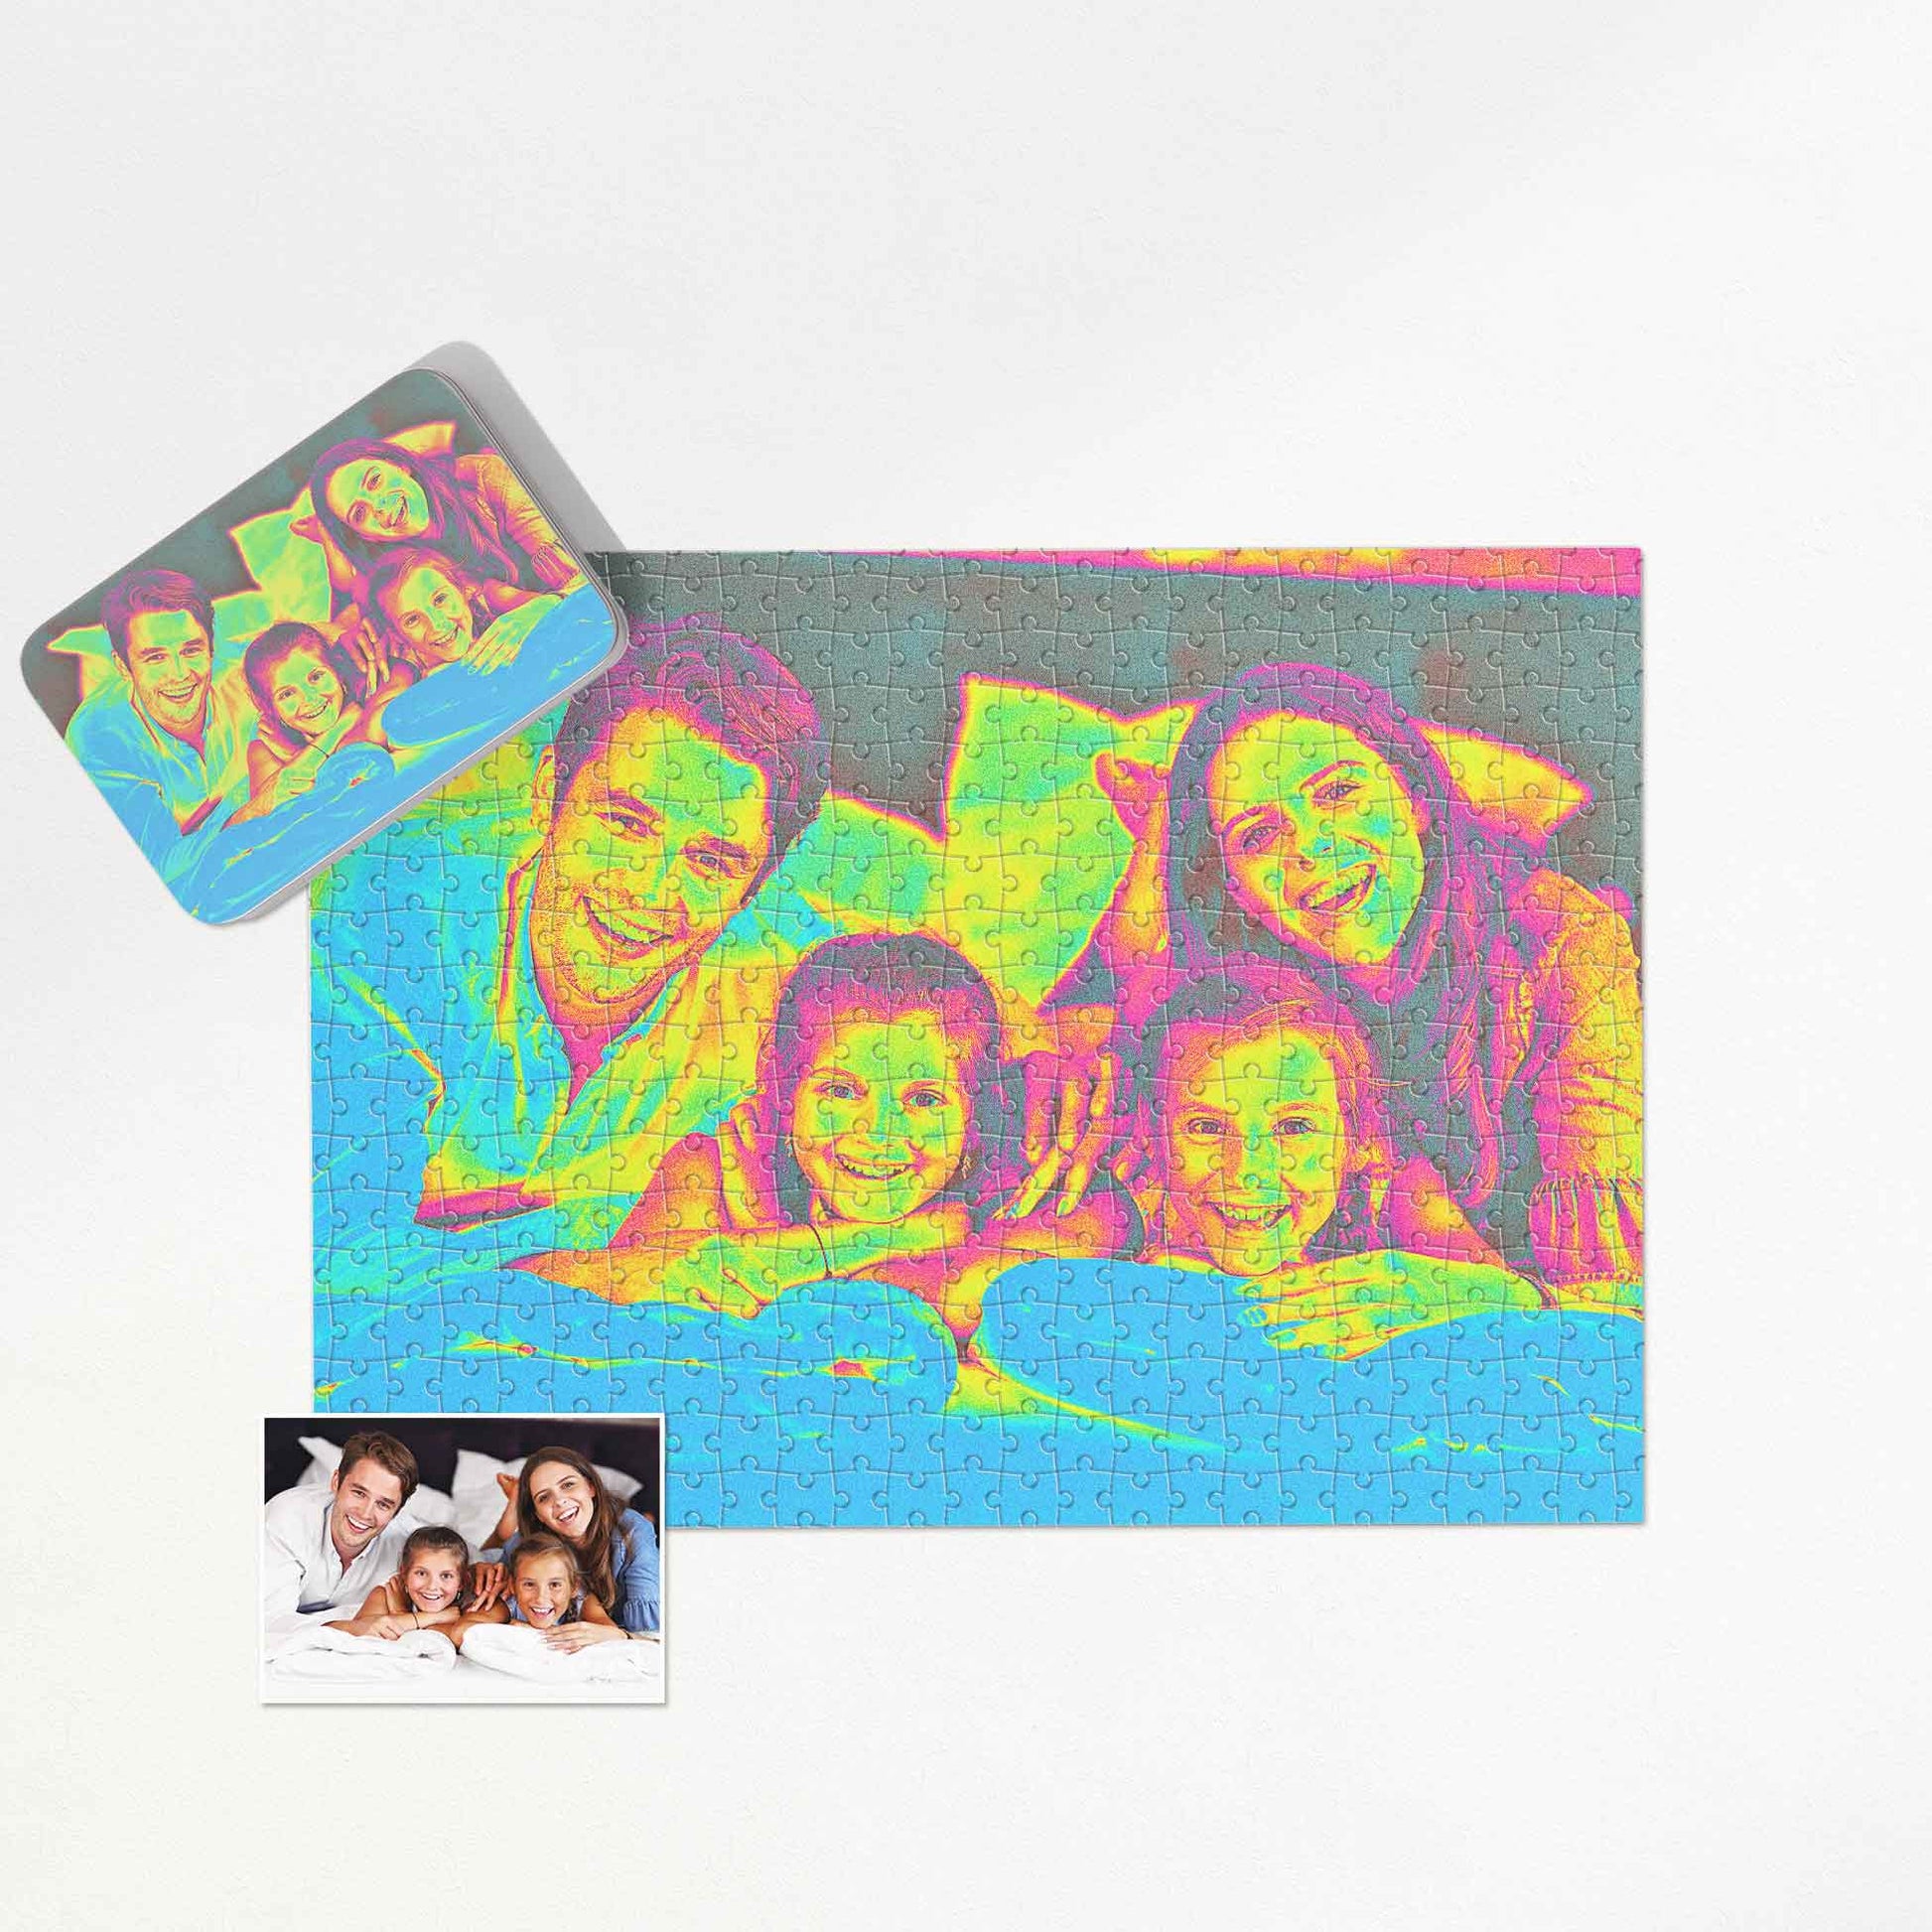 Experience an artistic journey with our Personalised Acid Trip Jigsaw Puzzle. Print from photo, showcasing edgy acid colors effect in blue, green, and pink hues. Handmade and trendy, it's a unique gift for friends and family, perfect for celebrating